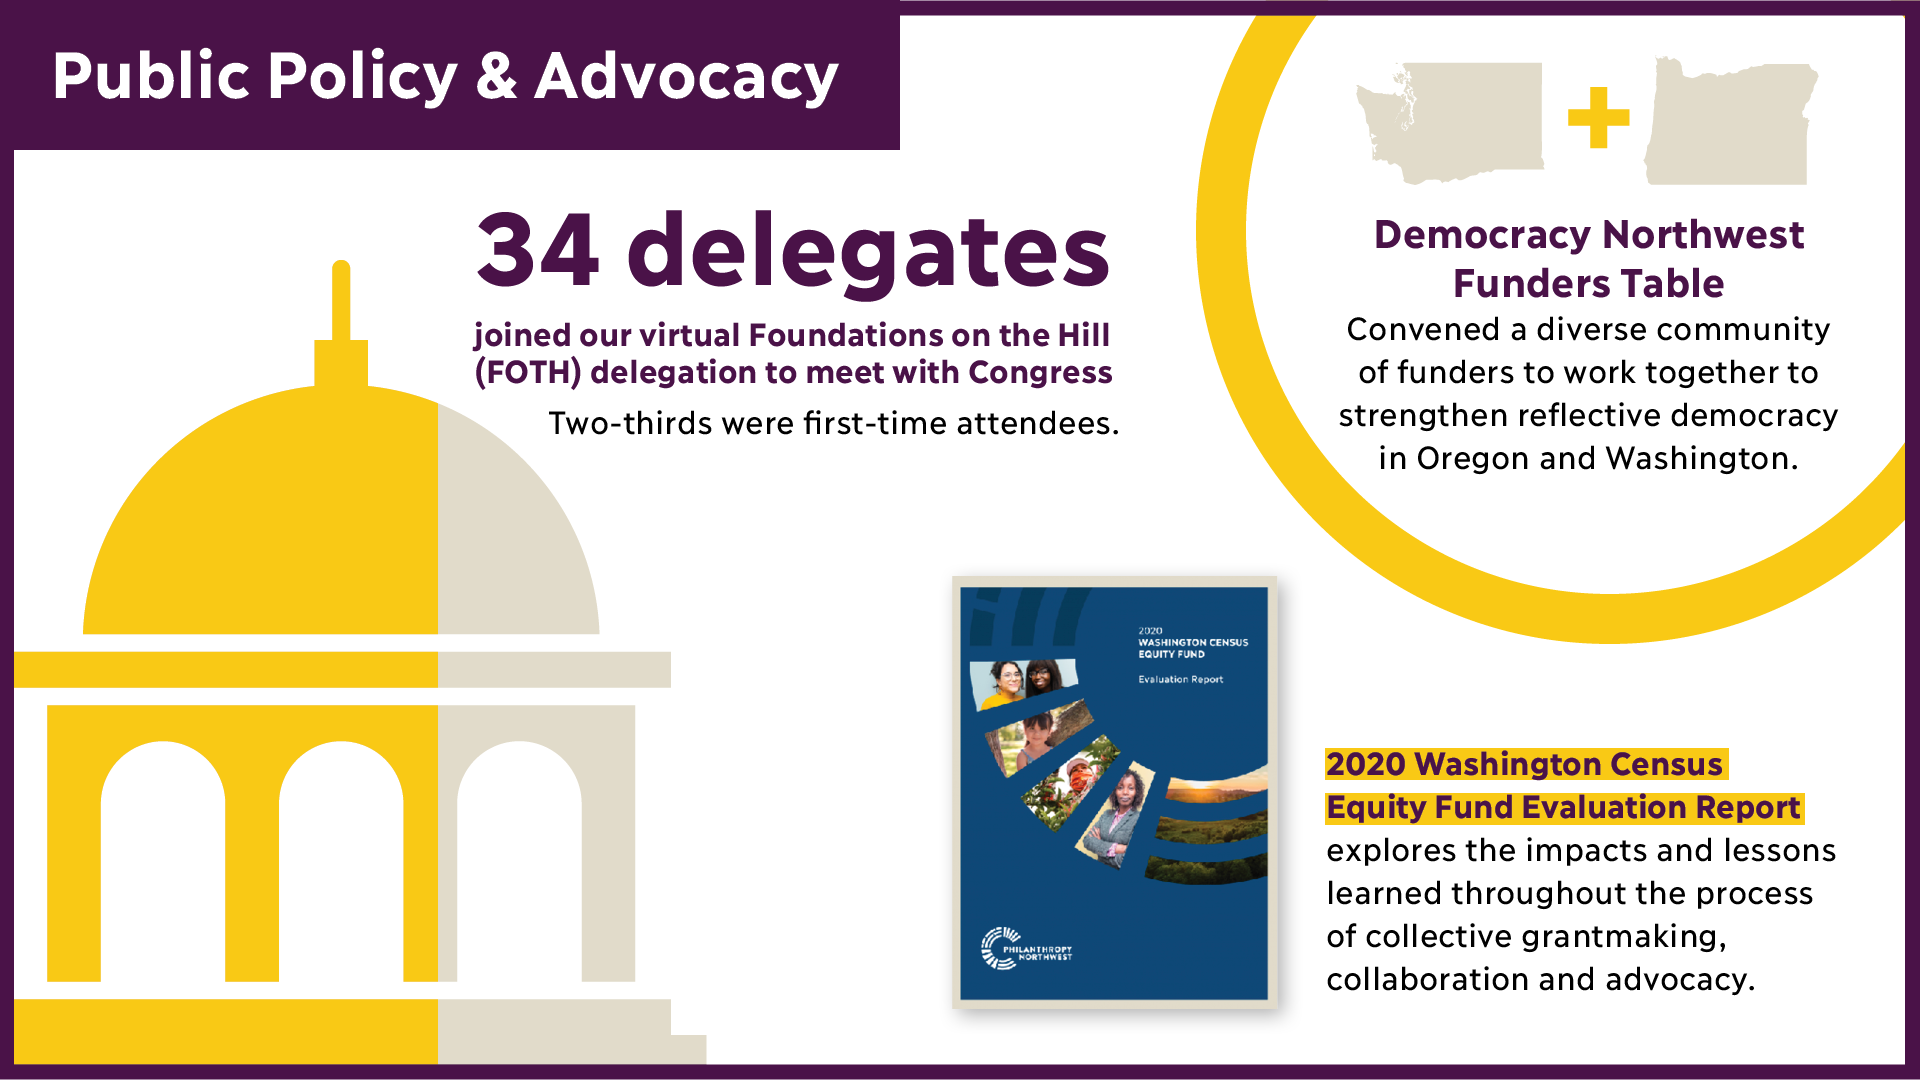 2021 Annual Report Slide on Public Policy and Advocacy. Had 34 delegates join Foundations on the Hill, convened our Democracy Northwest Funders Table, created our 2020 Washington Census Equity Fund Evaluation Report.